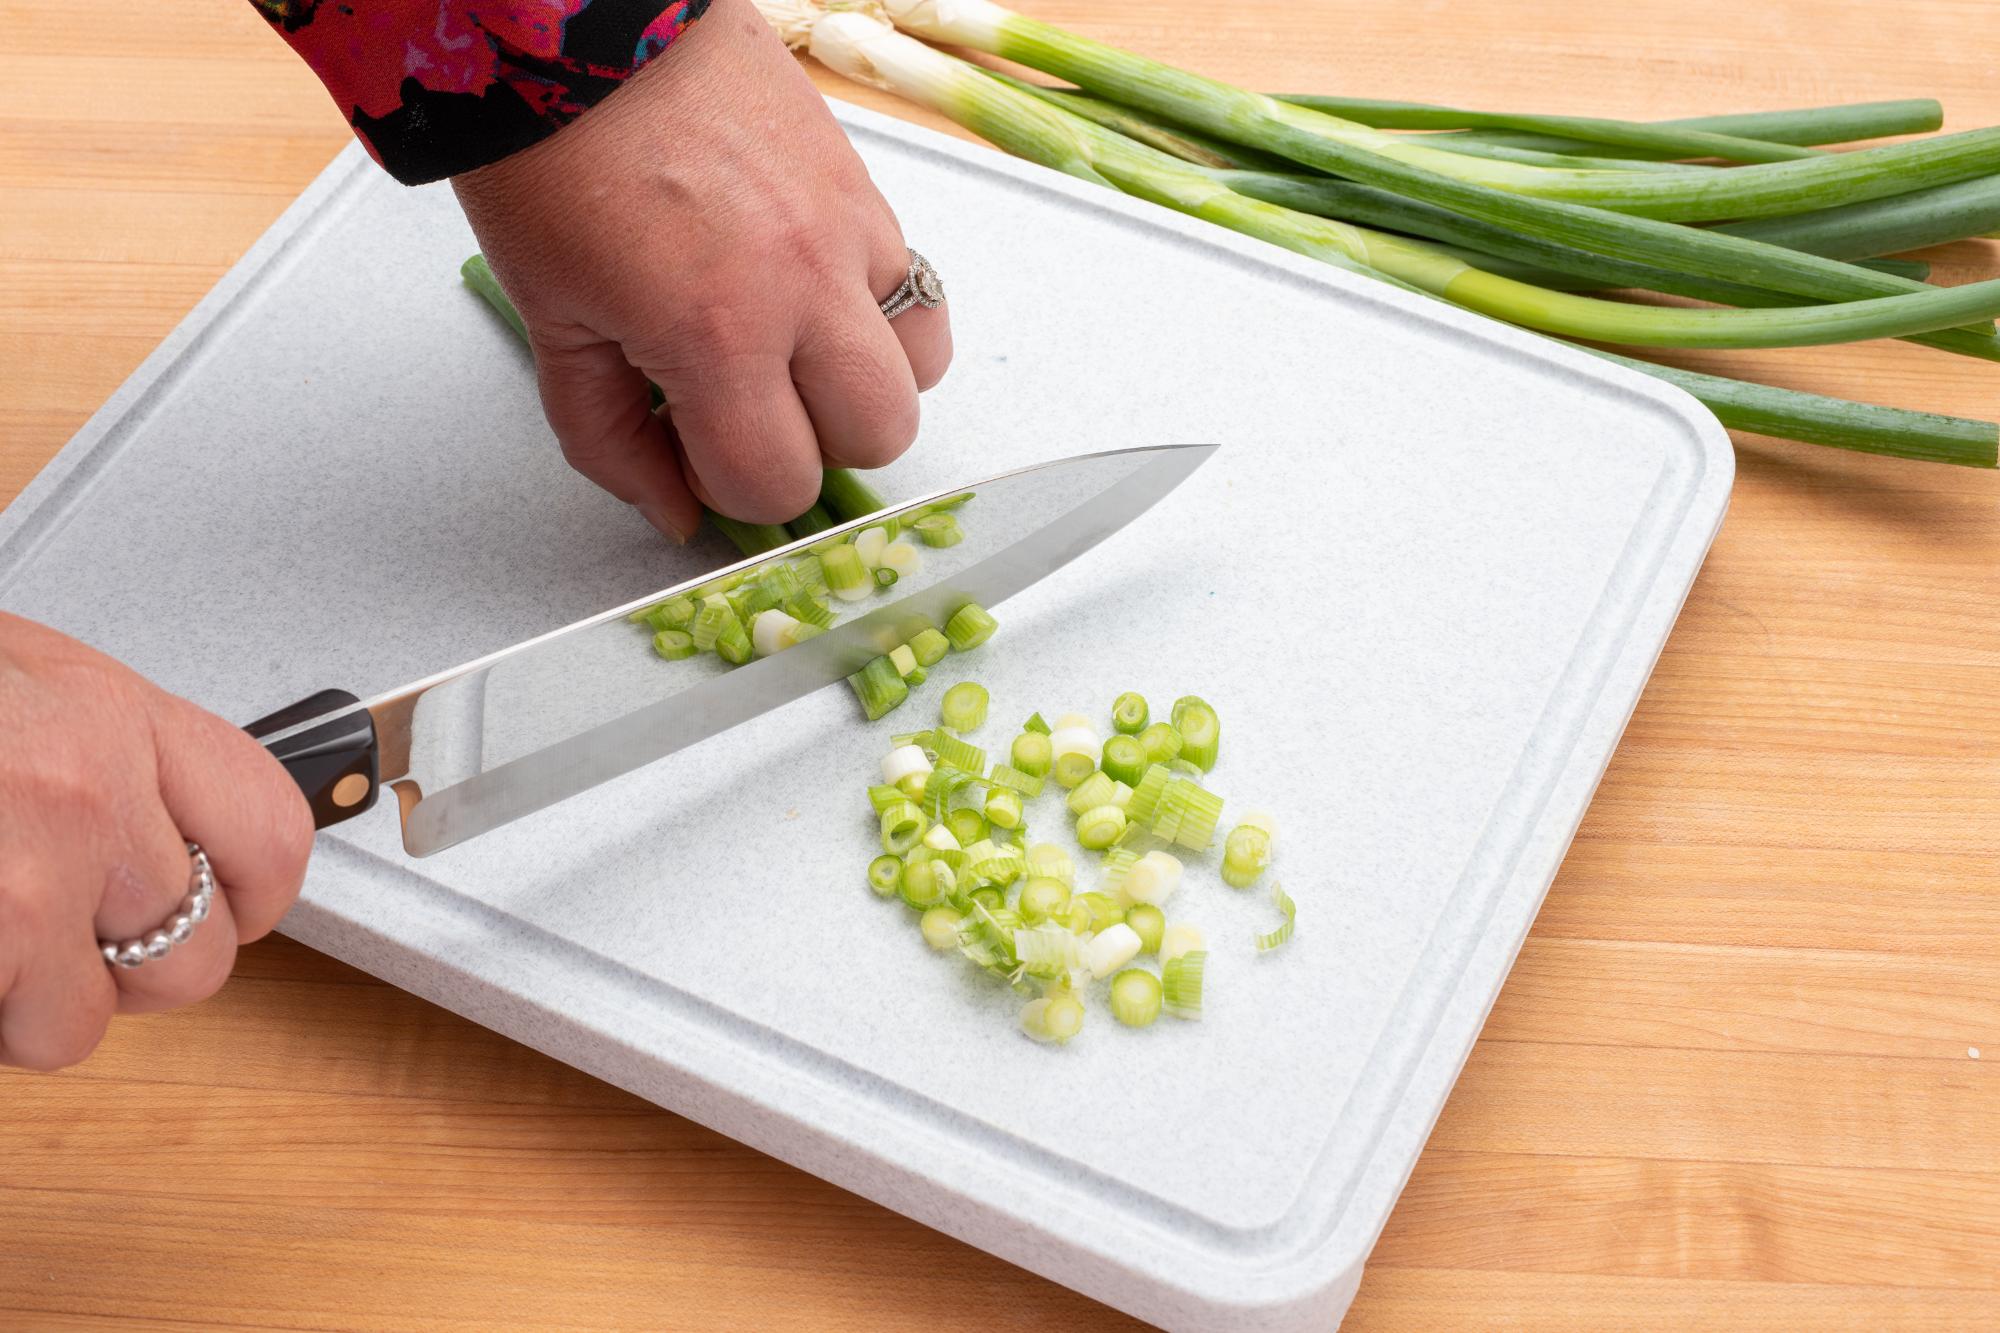 Slicing green onions with a Petite Chef knife.